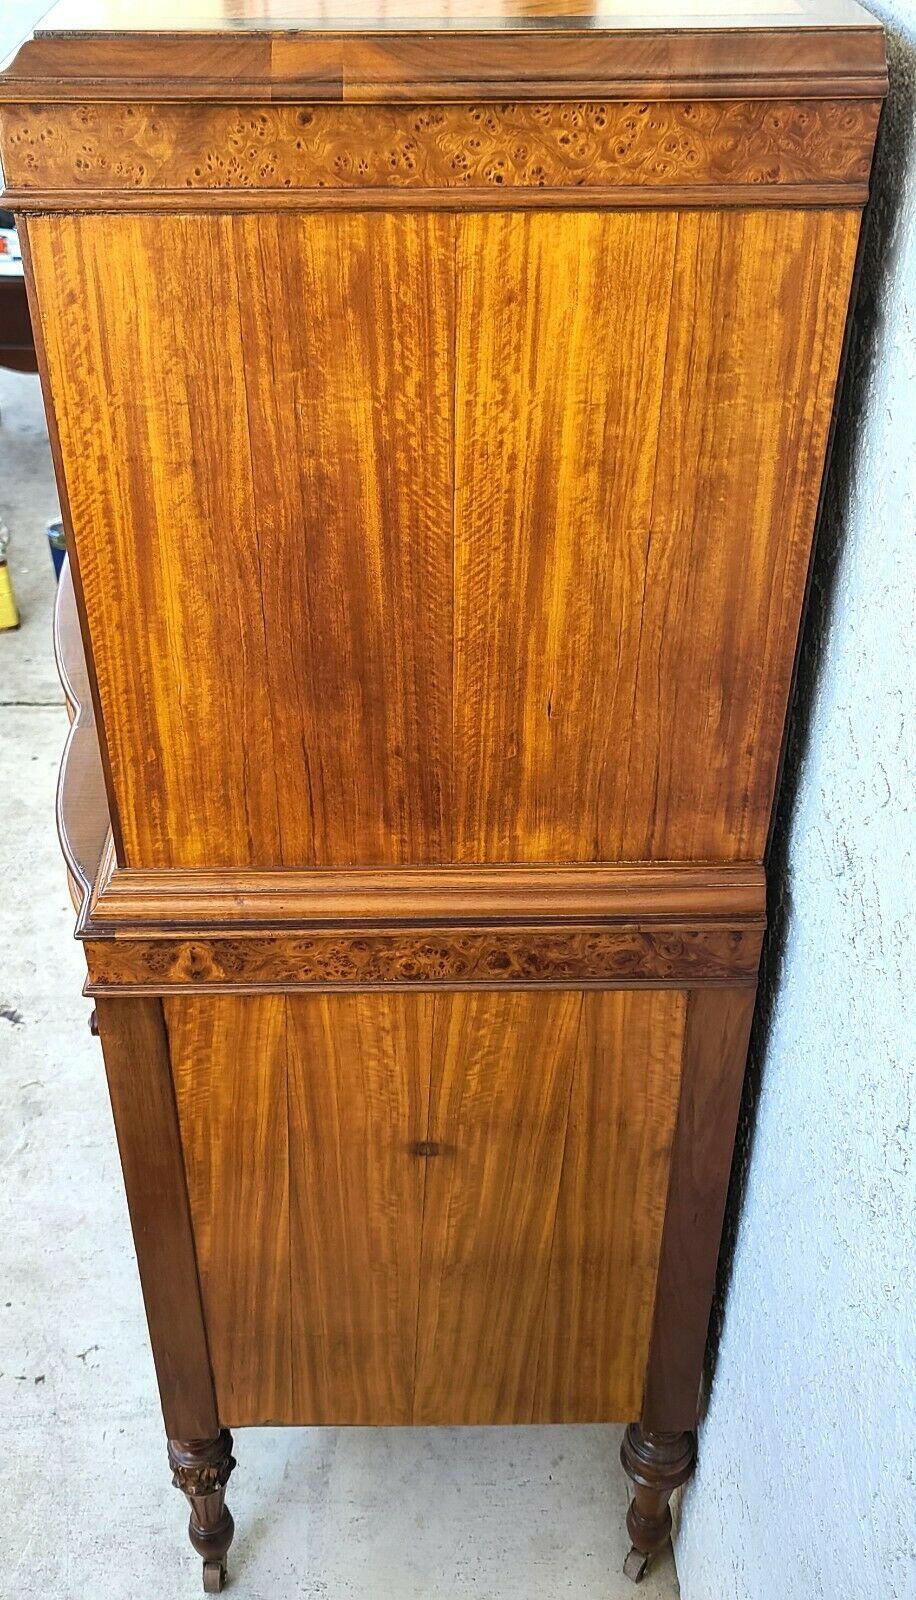 antique dressers from early 1900's